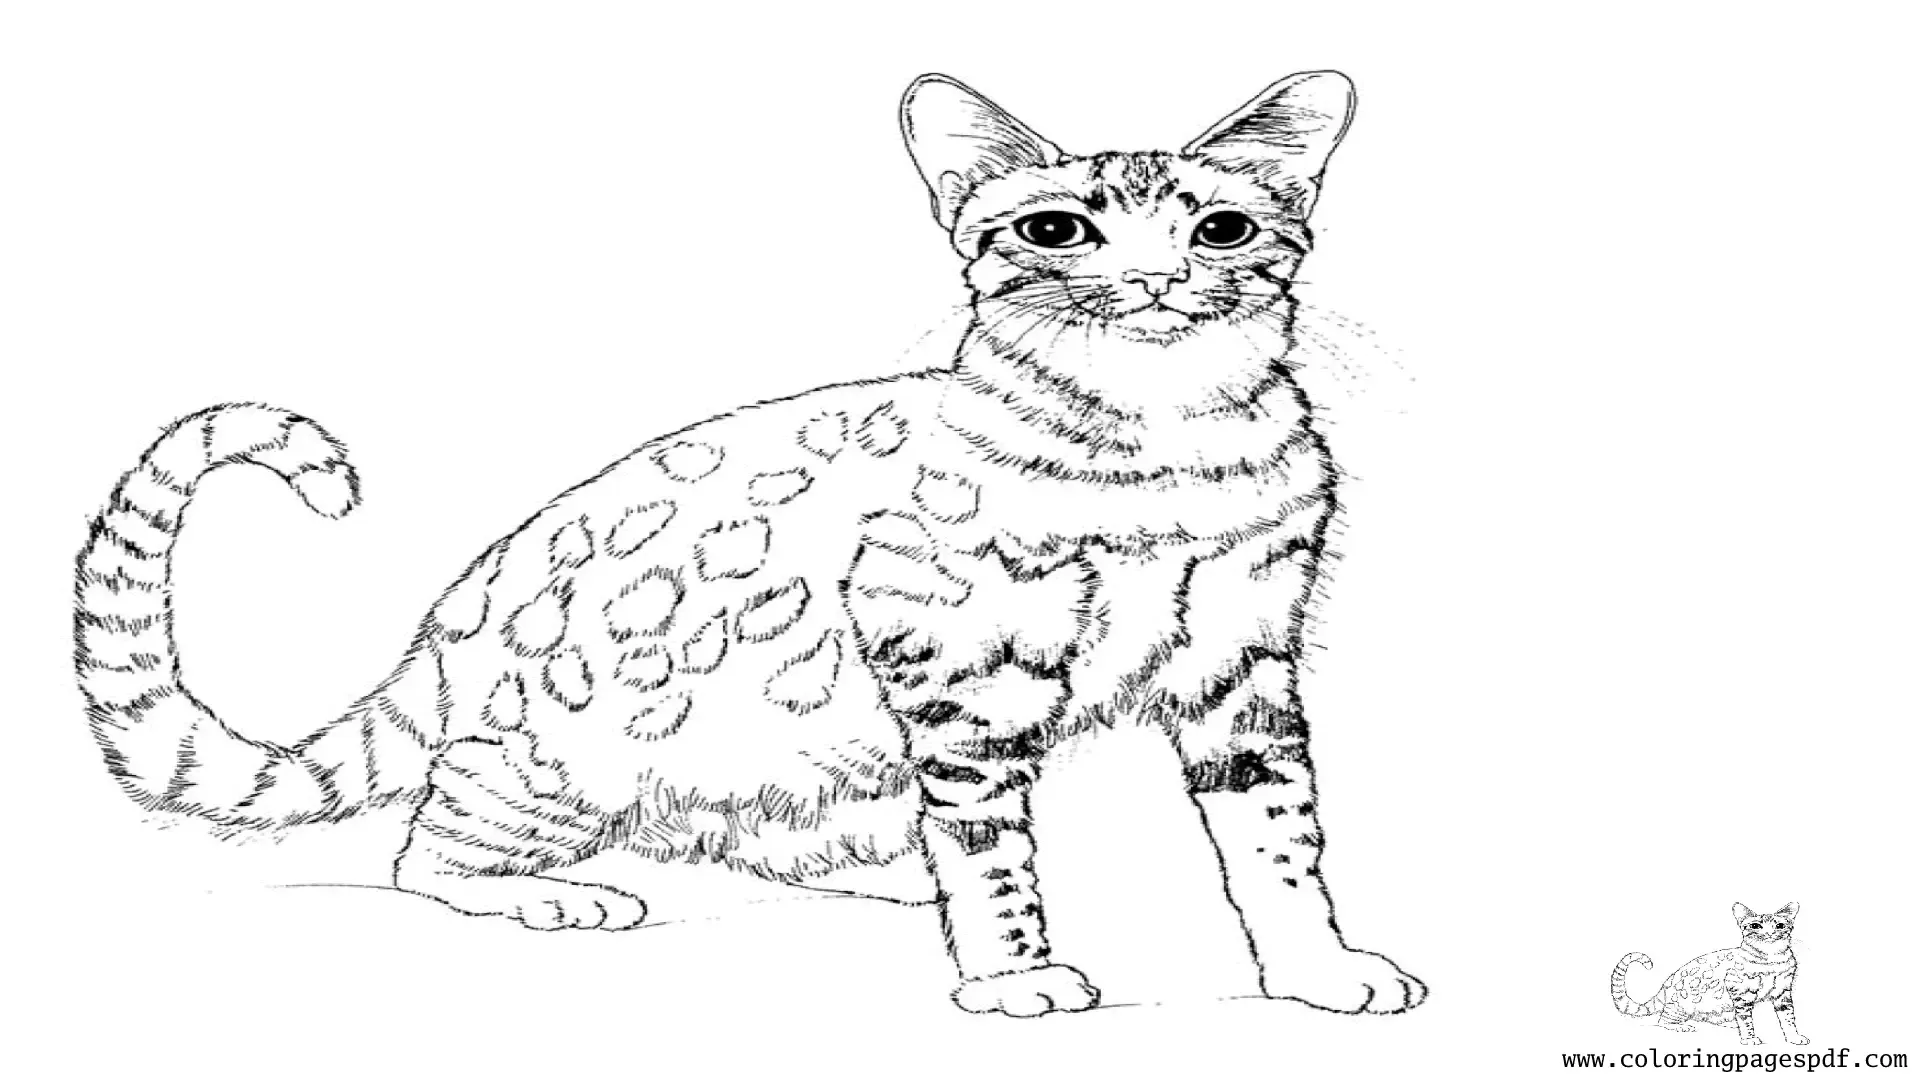 Coloring Page Of An Abyssinian Cat